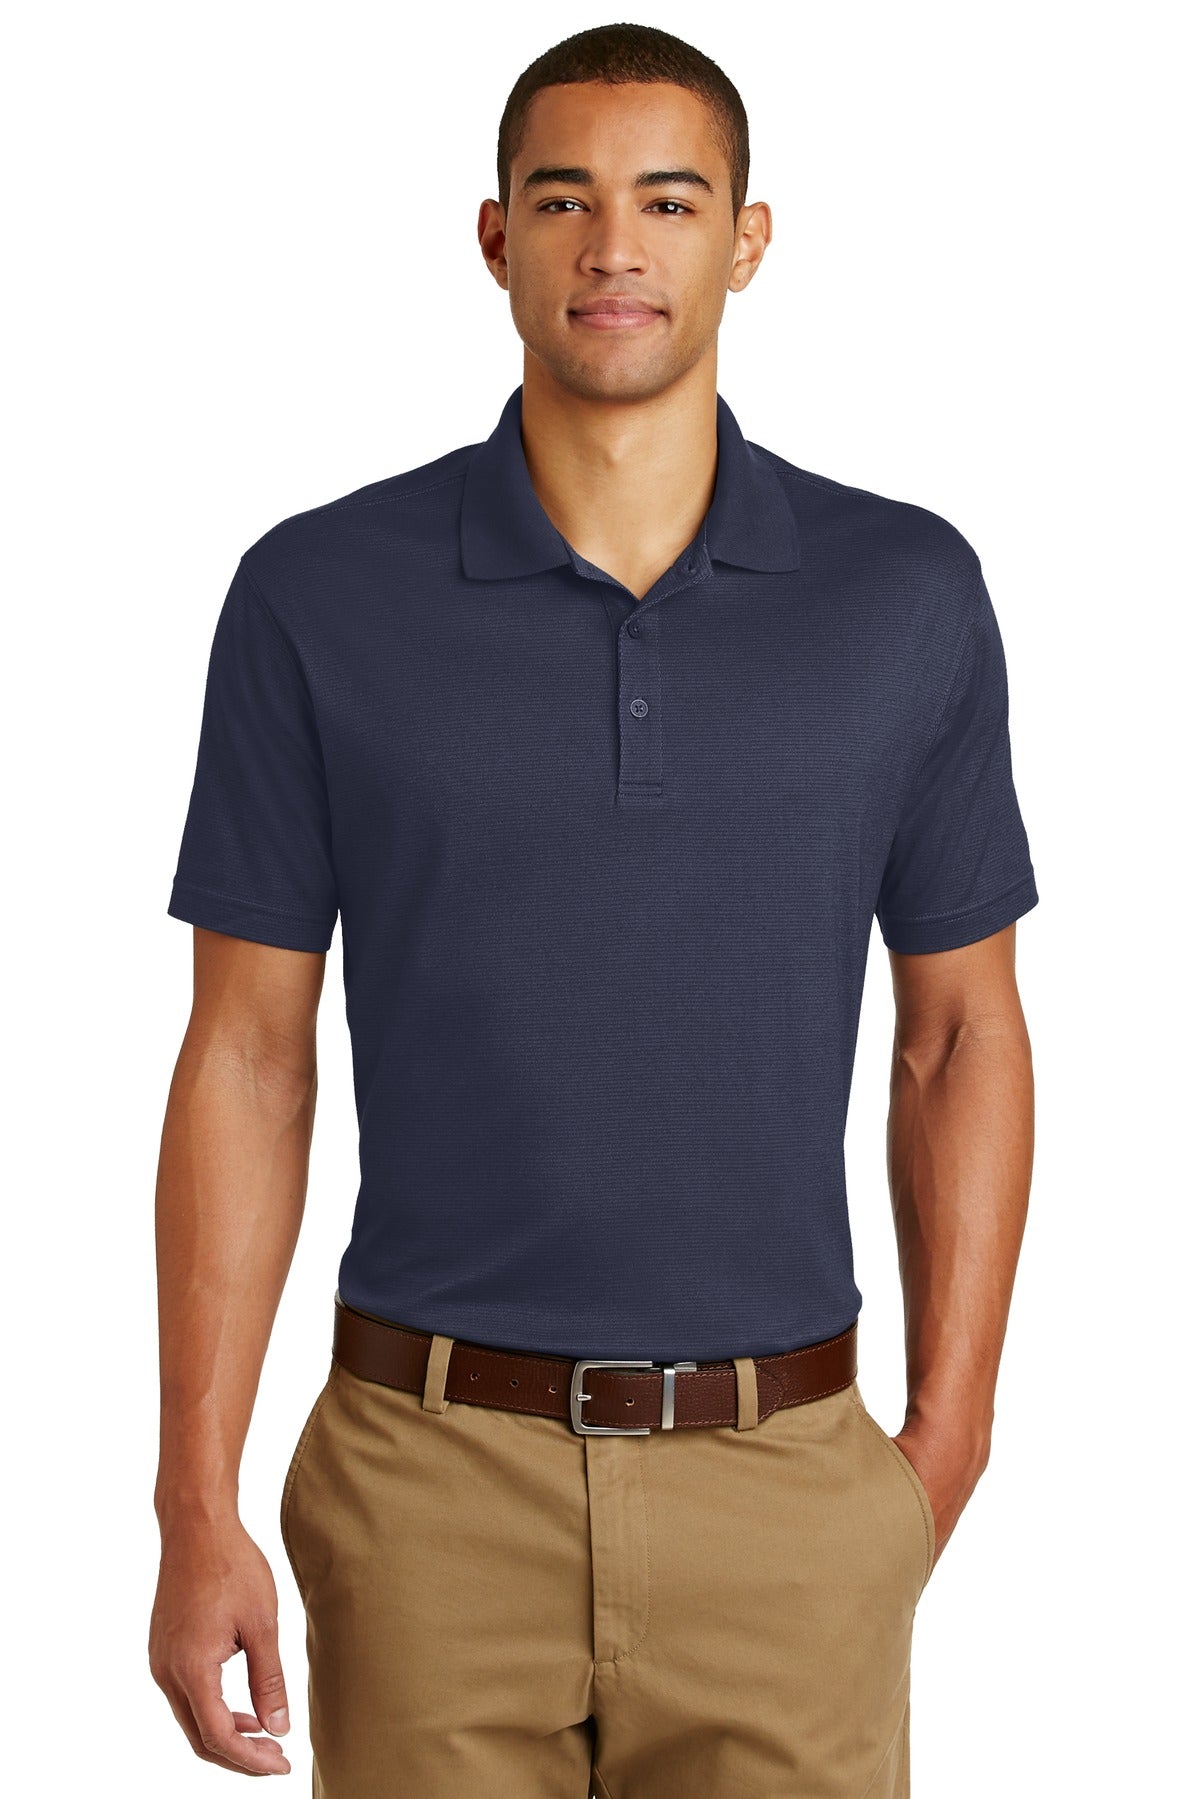 Photo of Eddie Bauer Polos/Knits EB102  color  Navy